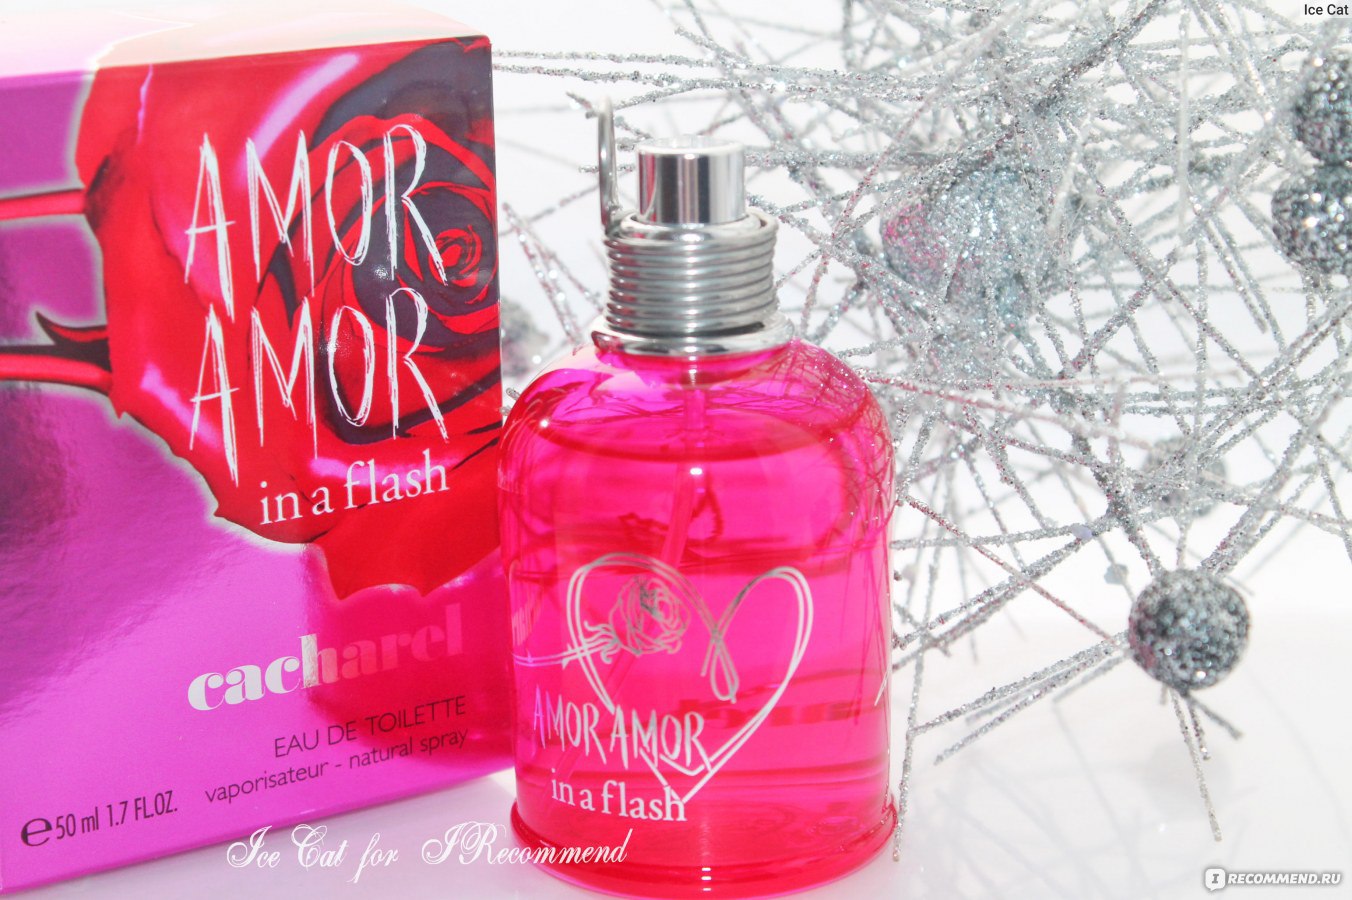 Terra amore. Амор Амор 50 мл. Cacharel Amor Amor EDT 50ml w. Amore Amore духи Cacharel. Cacharel Amor Amor 30ml EDT.